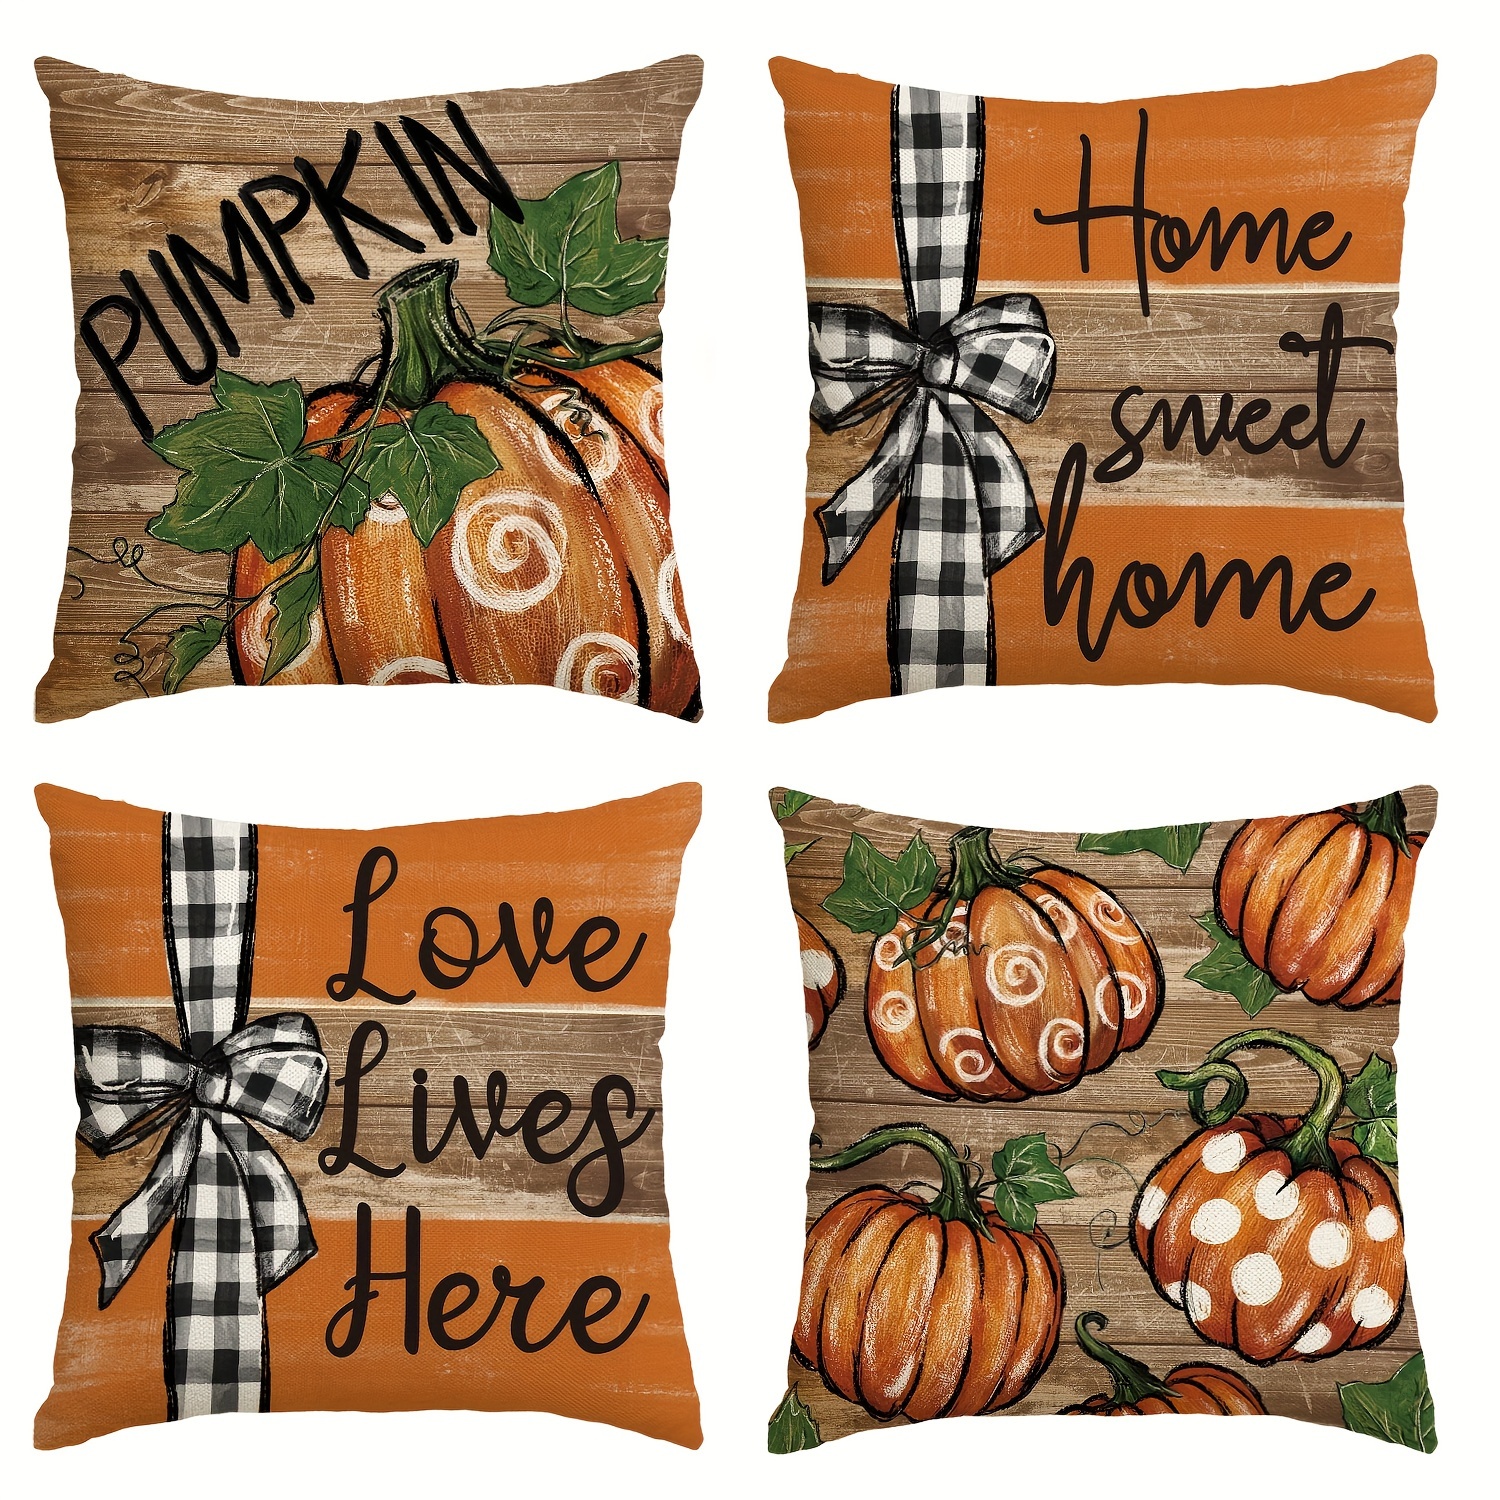 

Sm:)e Fall Pumpkin Home Sweet Home Throw Pillow Covers, 18 X 18 Inch Love Lives Here Autumn Harvest Stripes Polka Dots Decorations For Sofa Couch Set Of 4